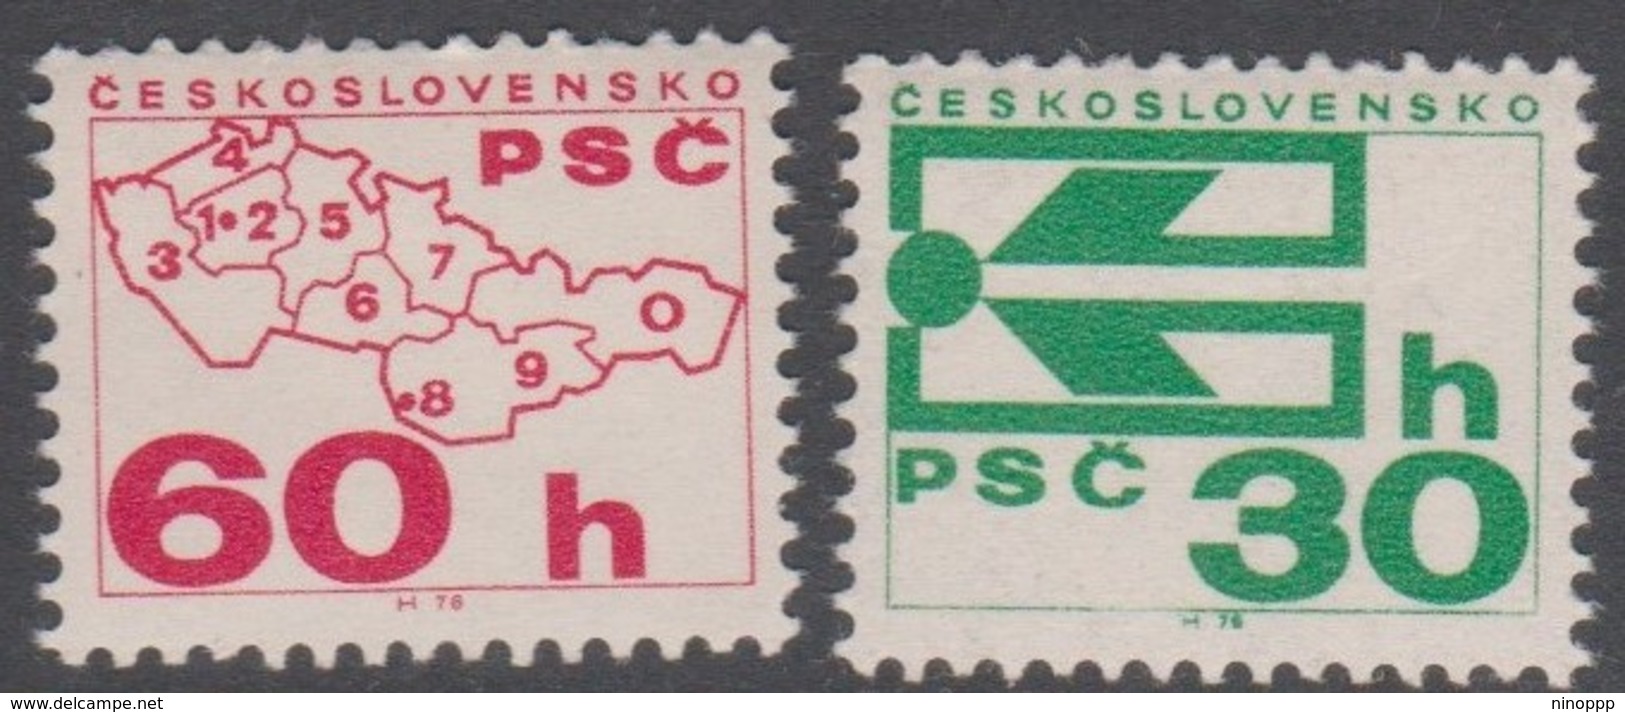 Czechoslovakia Scott 1978-1979 1976 Coil Stamps, Mint Never Hinged - Unused Stamps